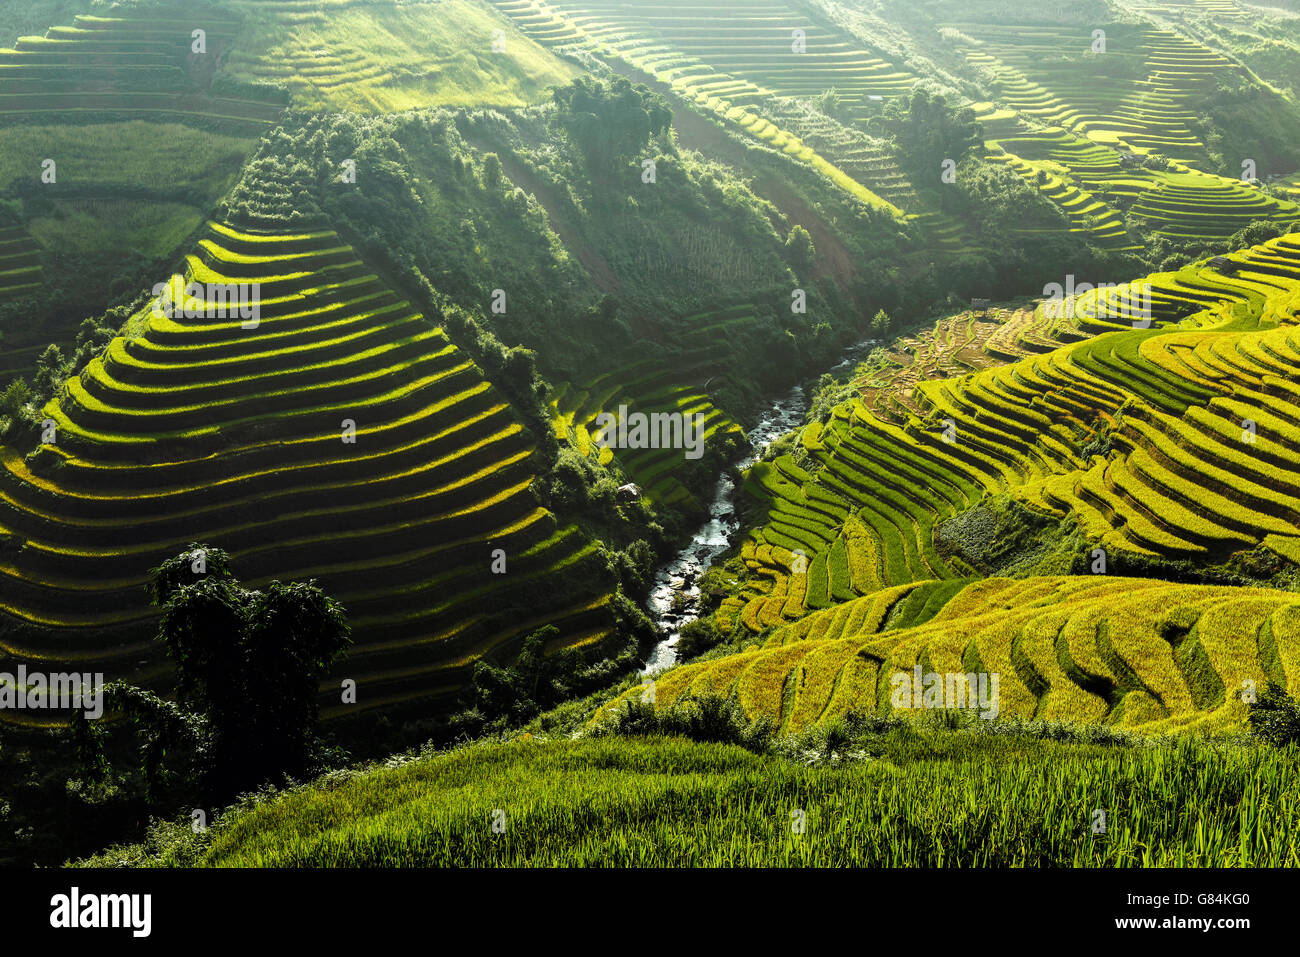 Paddy field rice terraces, Asia Stock Photo